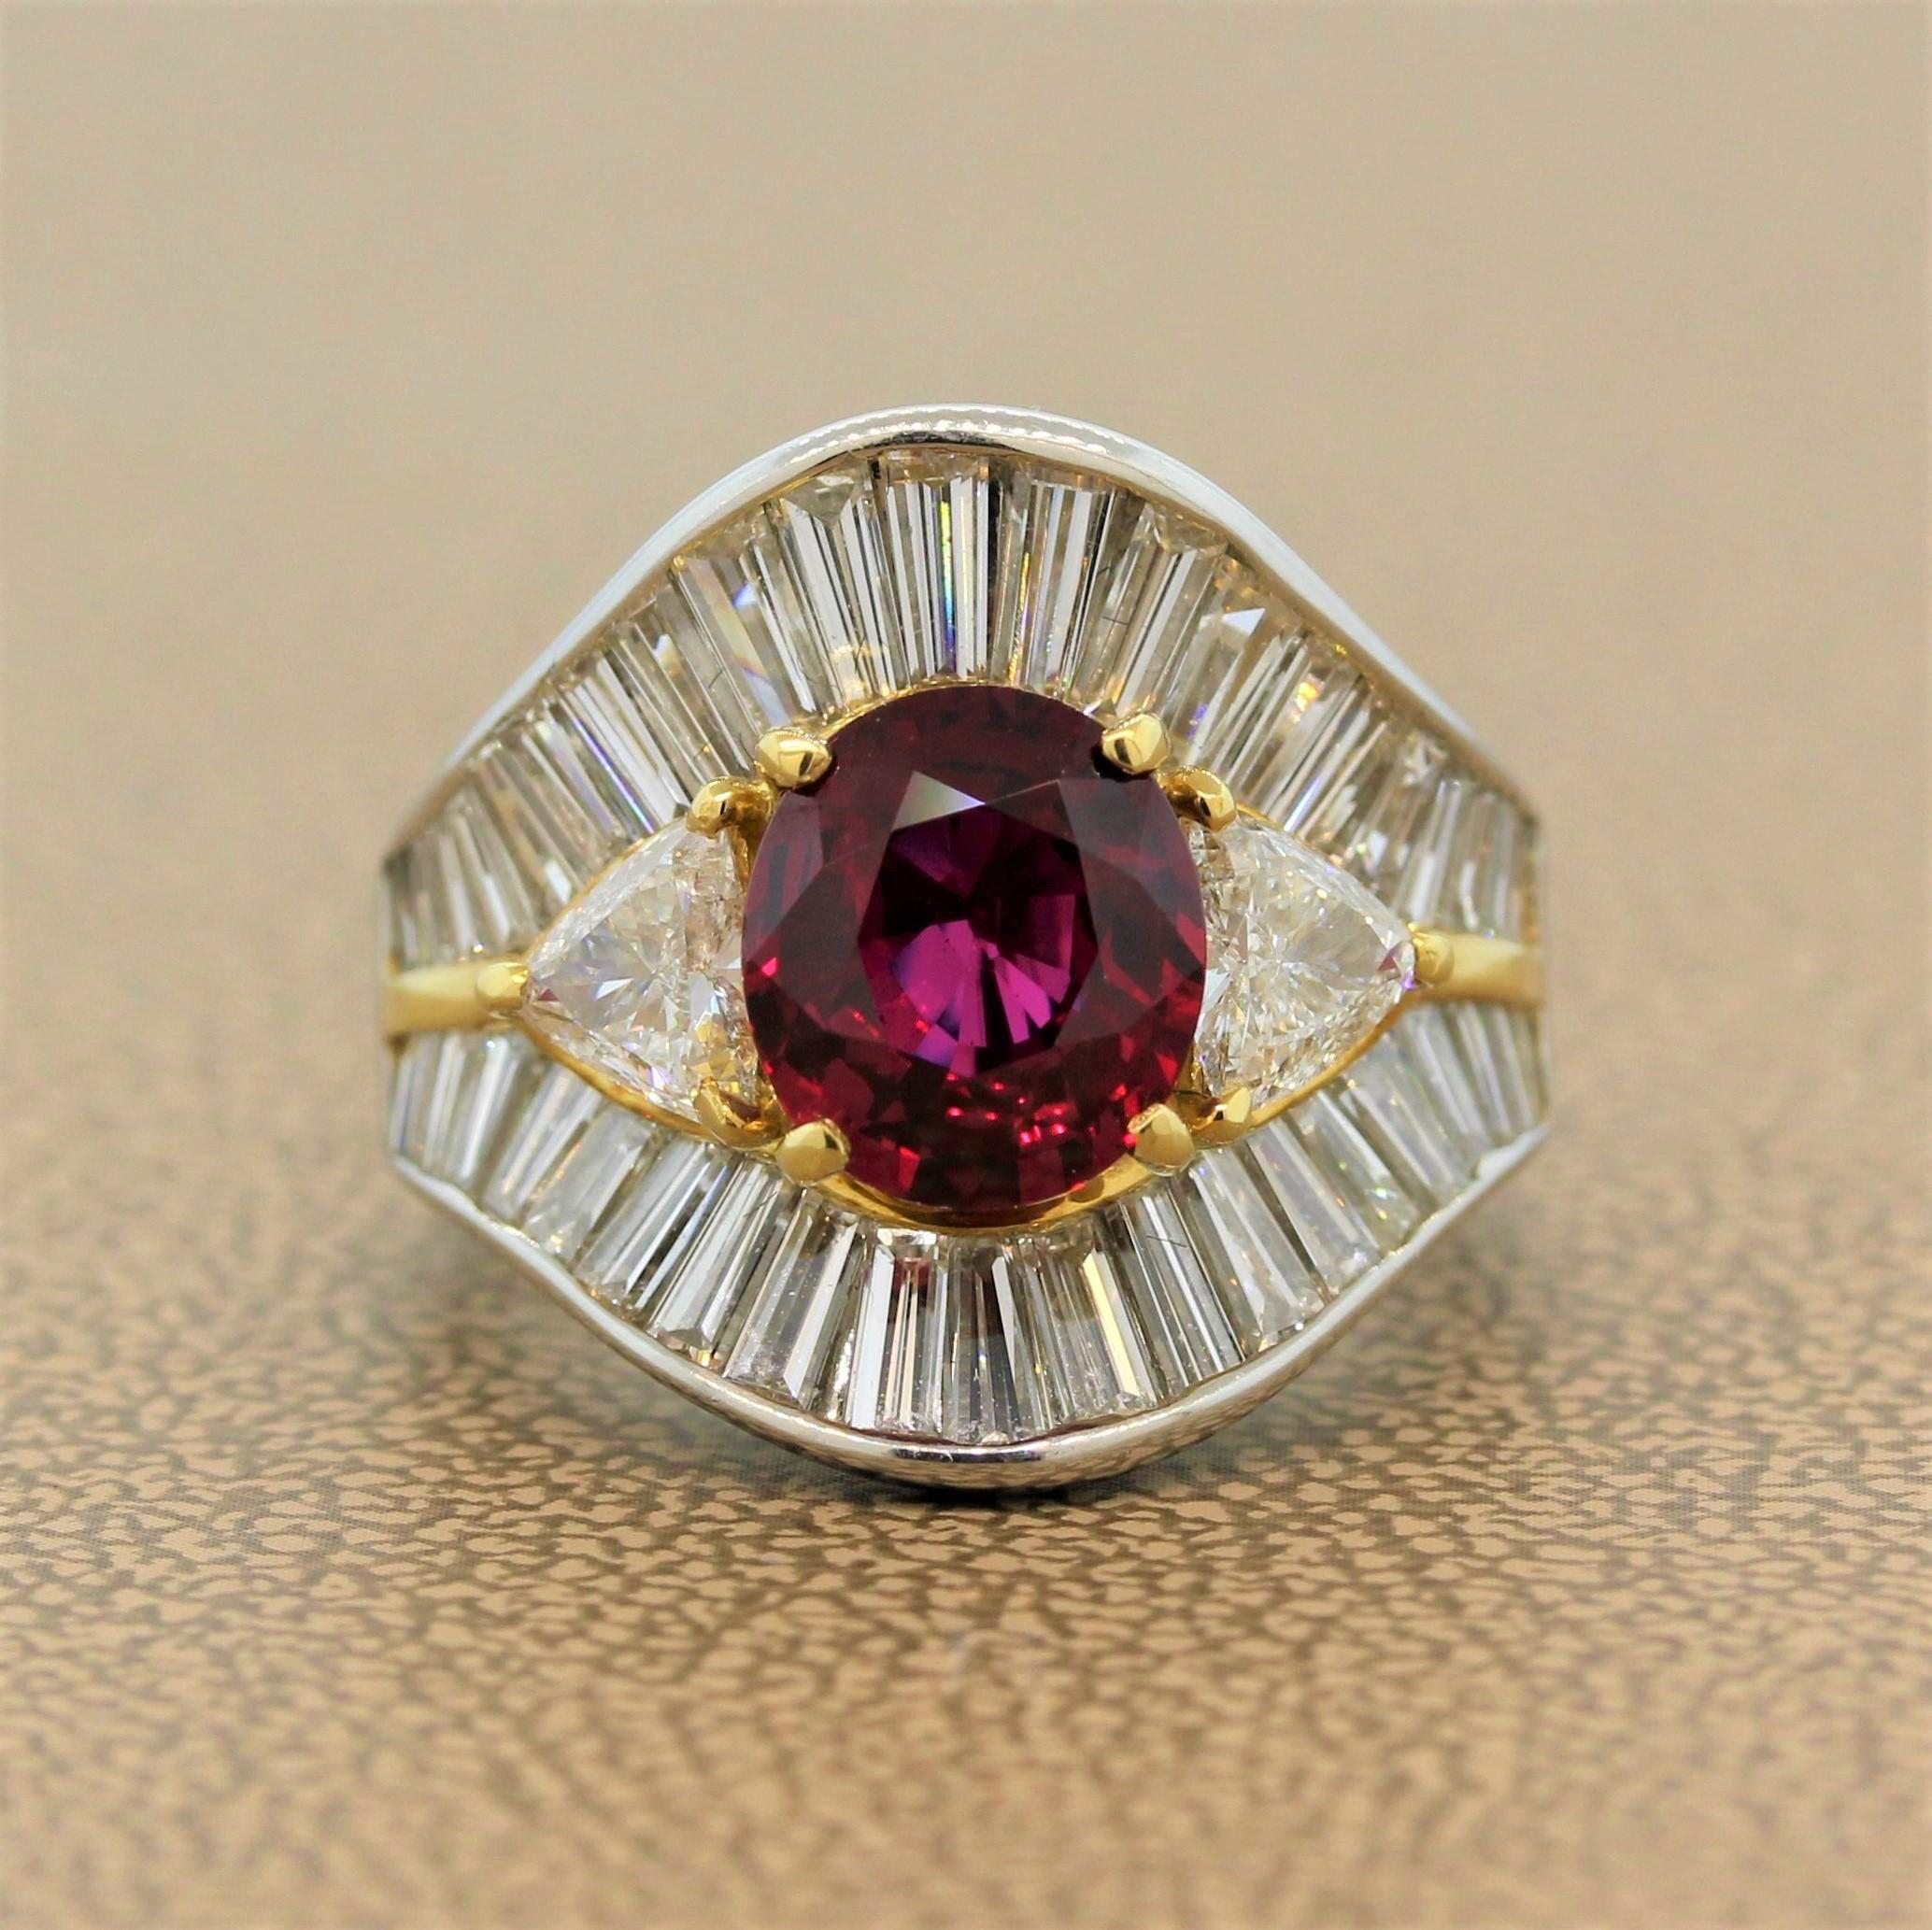 A GIA certified unheated 2.53 carat ruby in an 18K yellow gold setting is the feature of this gorgeous ring. This is possibly the finest ruby we have encountered, heated or unheated. Loup clean, the ruby is pure color, fire and love. It is accented